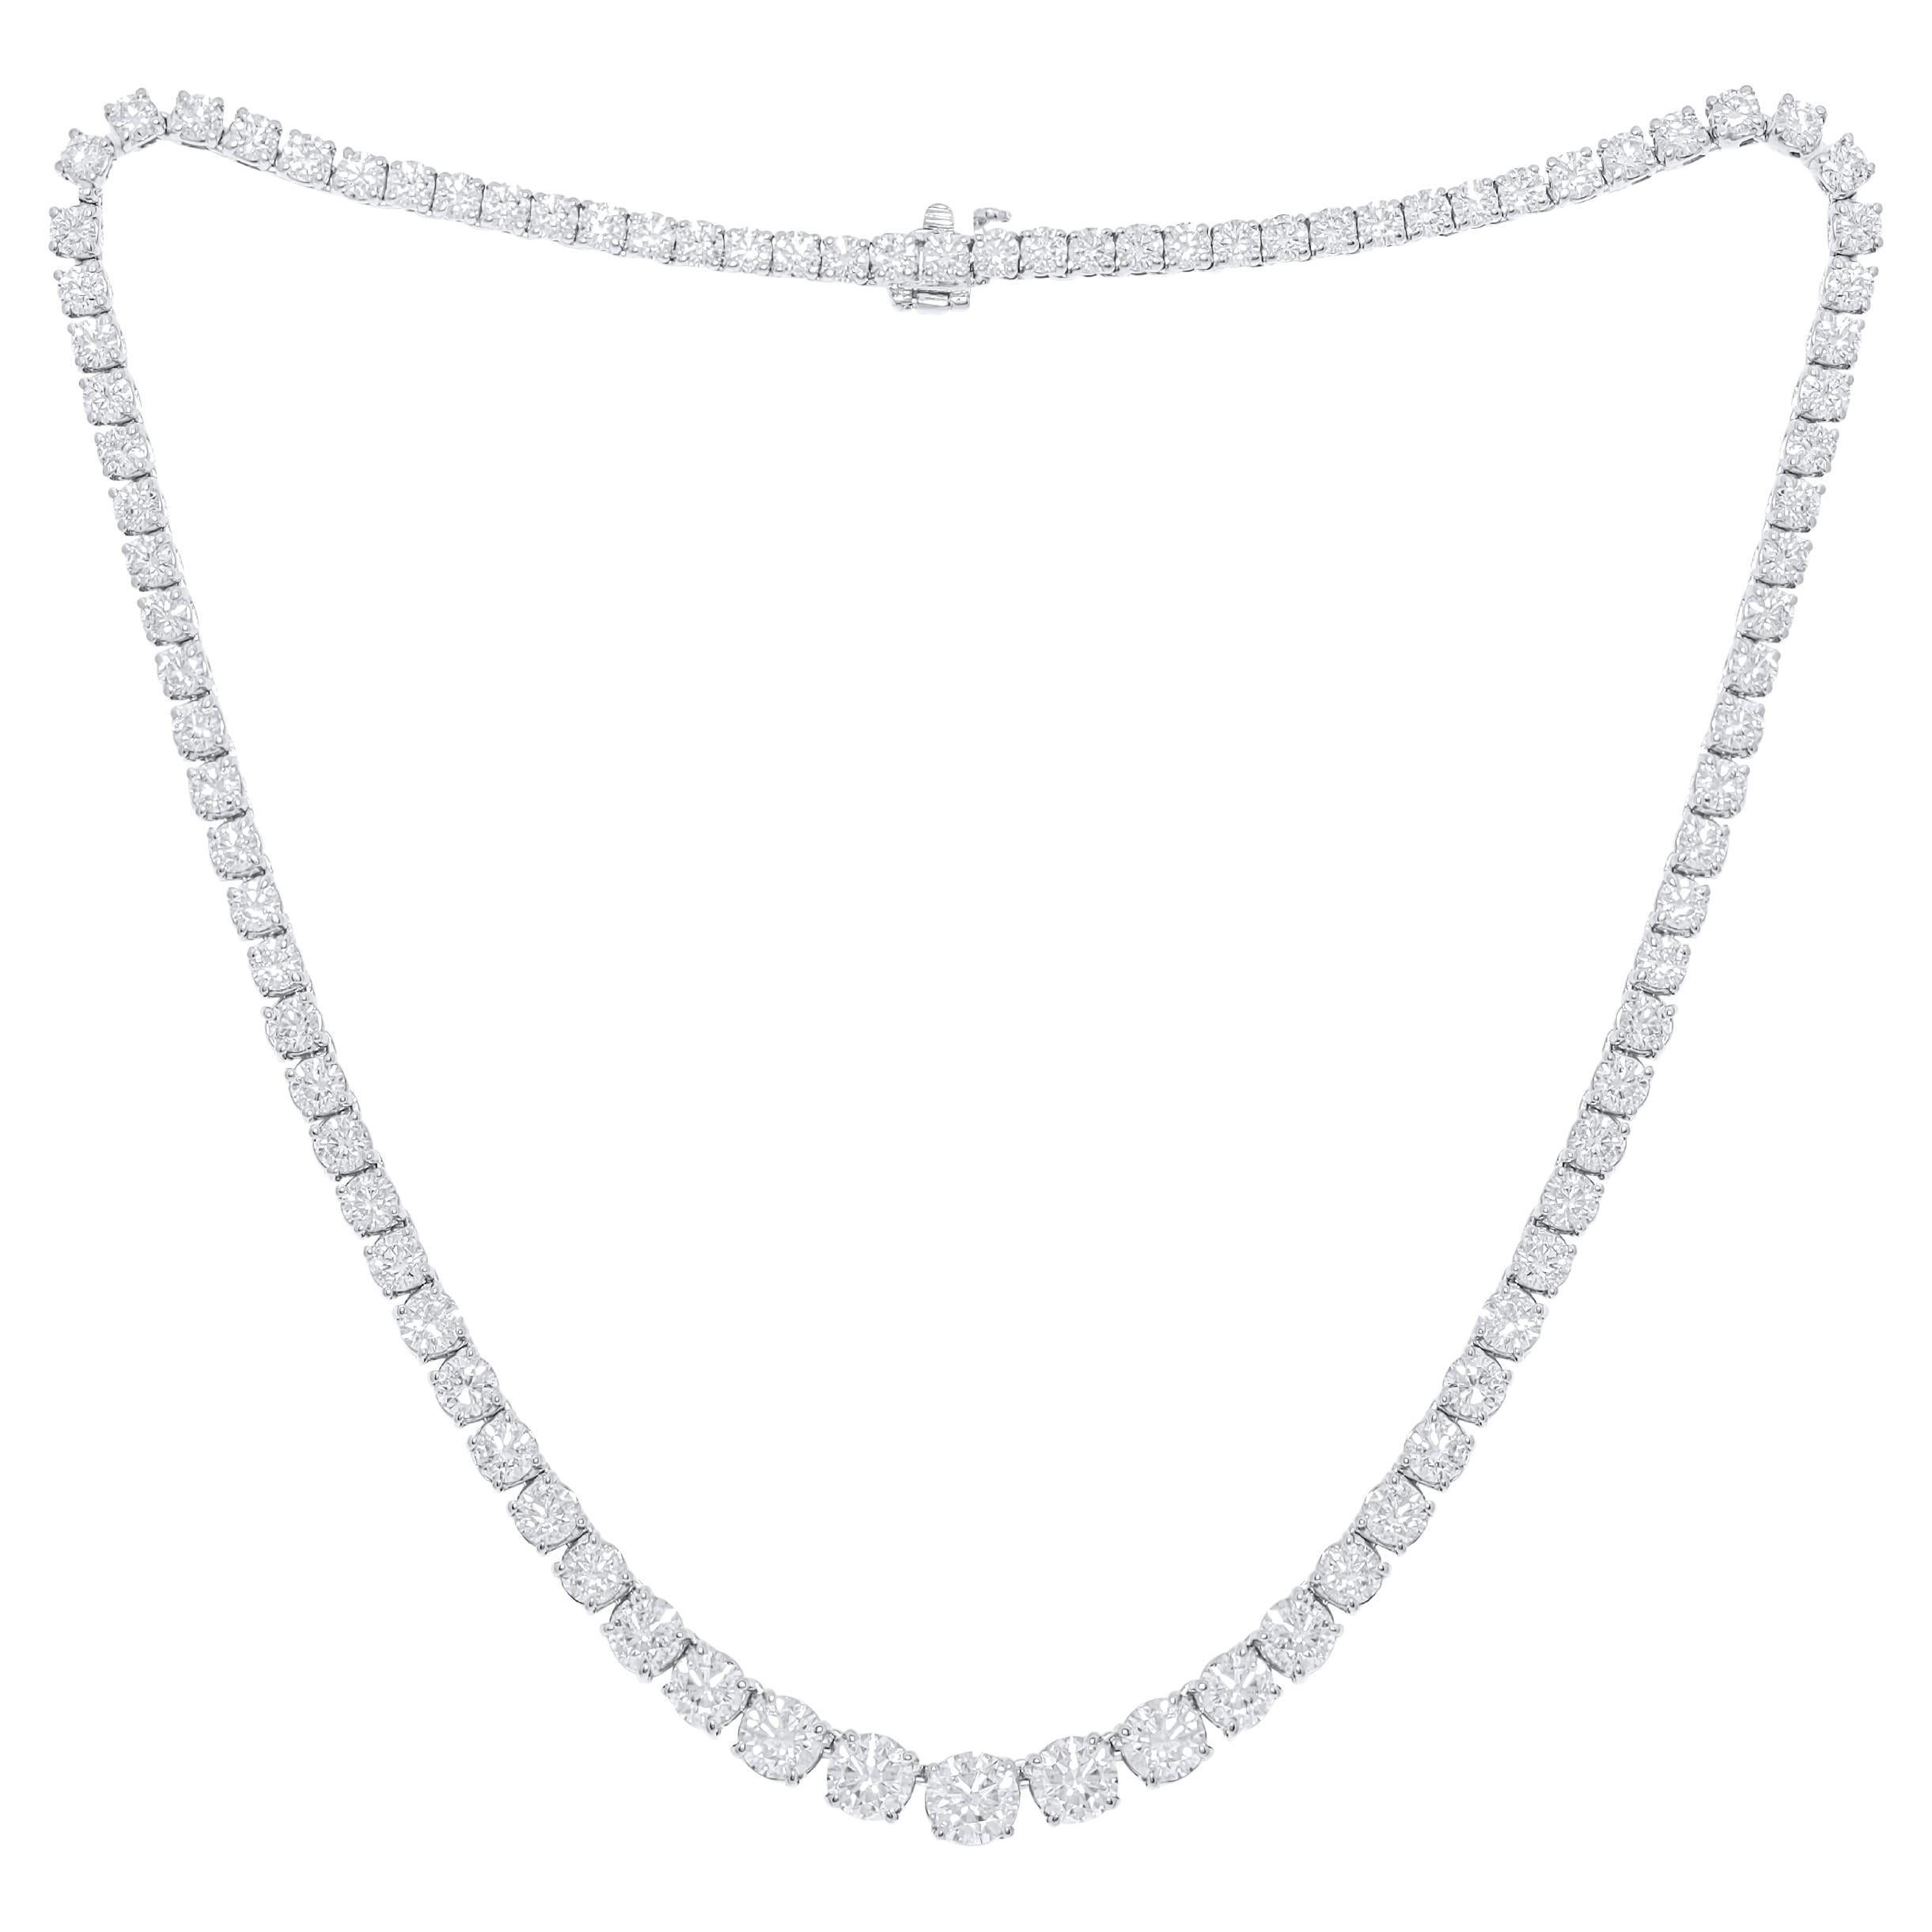 Diana M. 14kt White Gold Graduated Reviera Tennis Necklace  20.00 cts prong For Sale